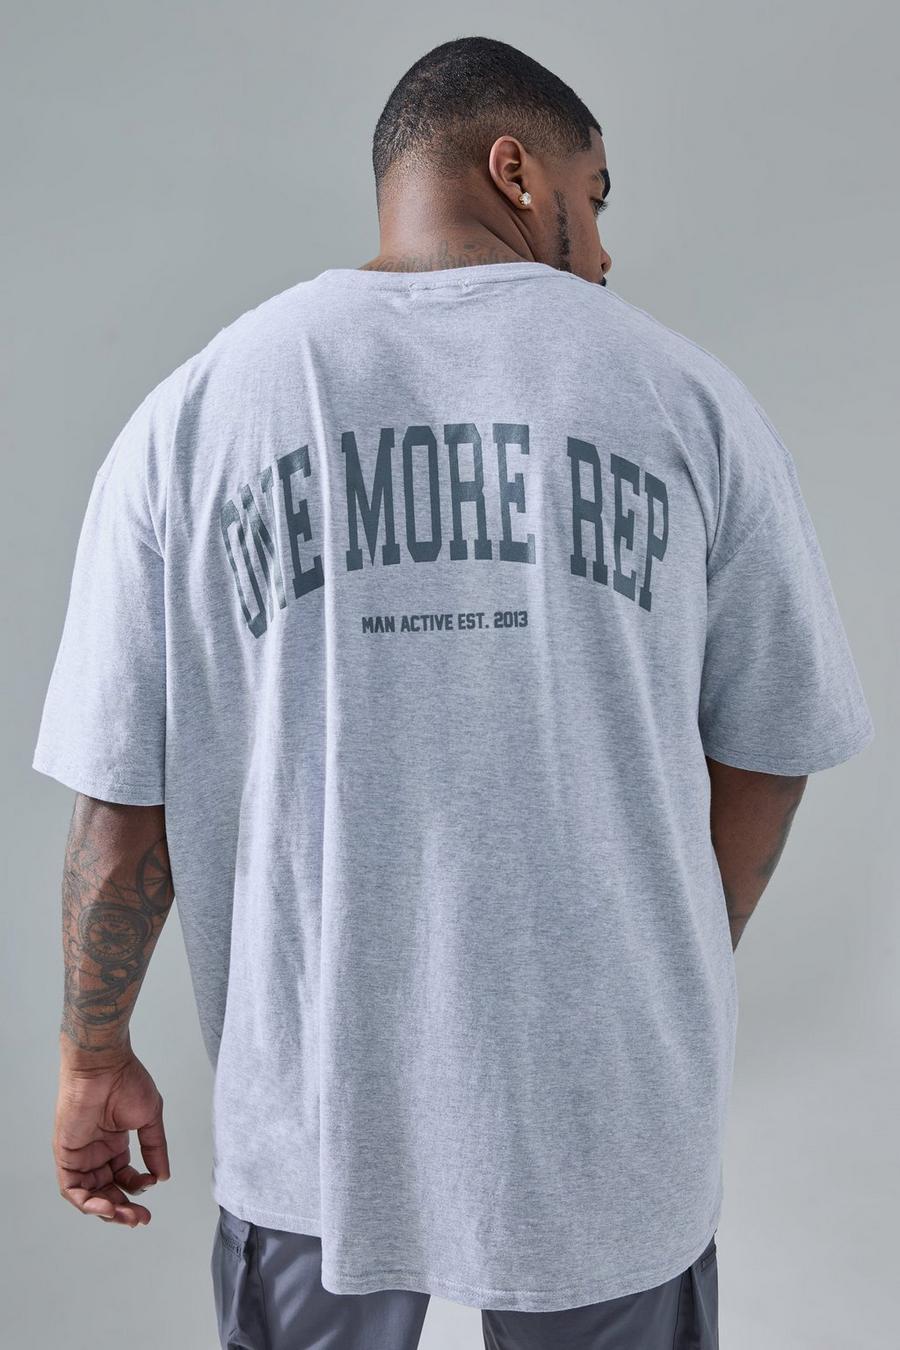 T-shirt Plus Size oversize Man Active One More Rep, Grey marl image number 1